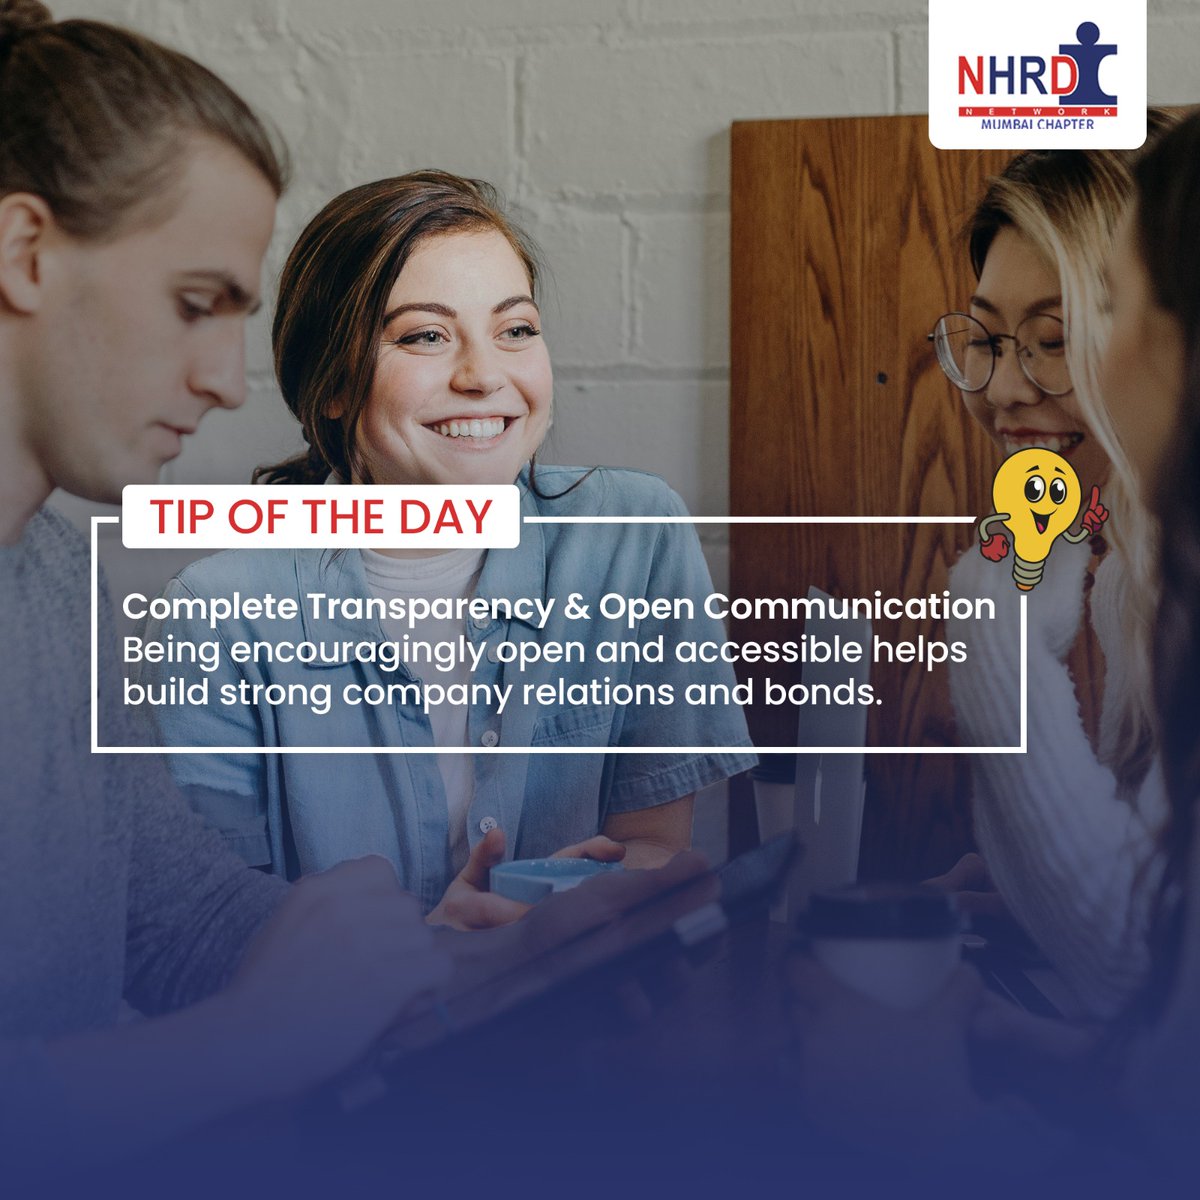 Transparency is the key to strong bonds🤝 #NHRDN #NHRDNMumbai #Tips #TipOfTheDay #HRInsights #Networking #Network #HR #HRDepartment